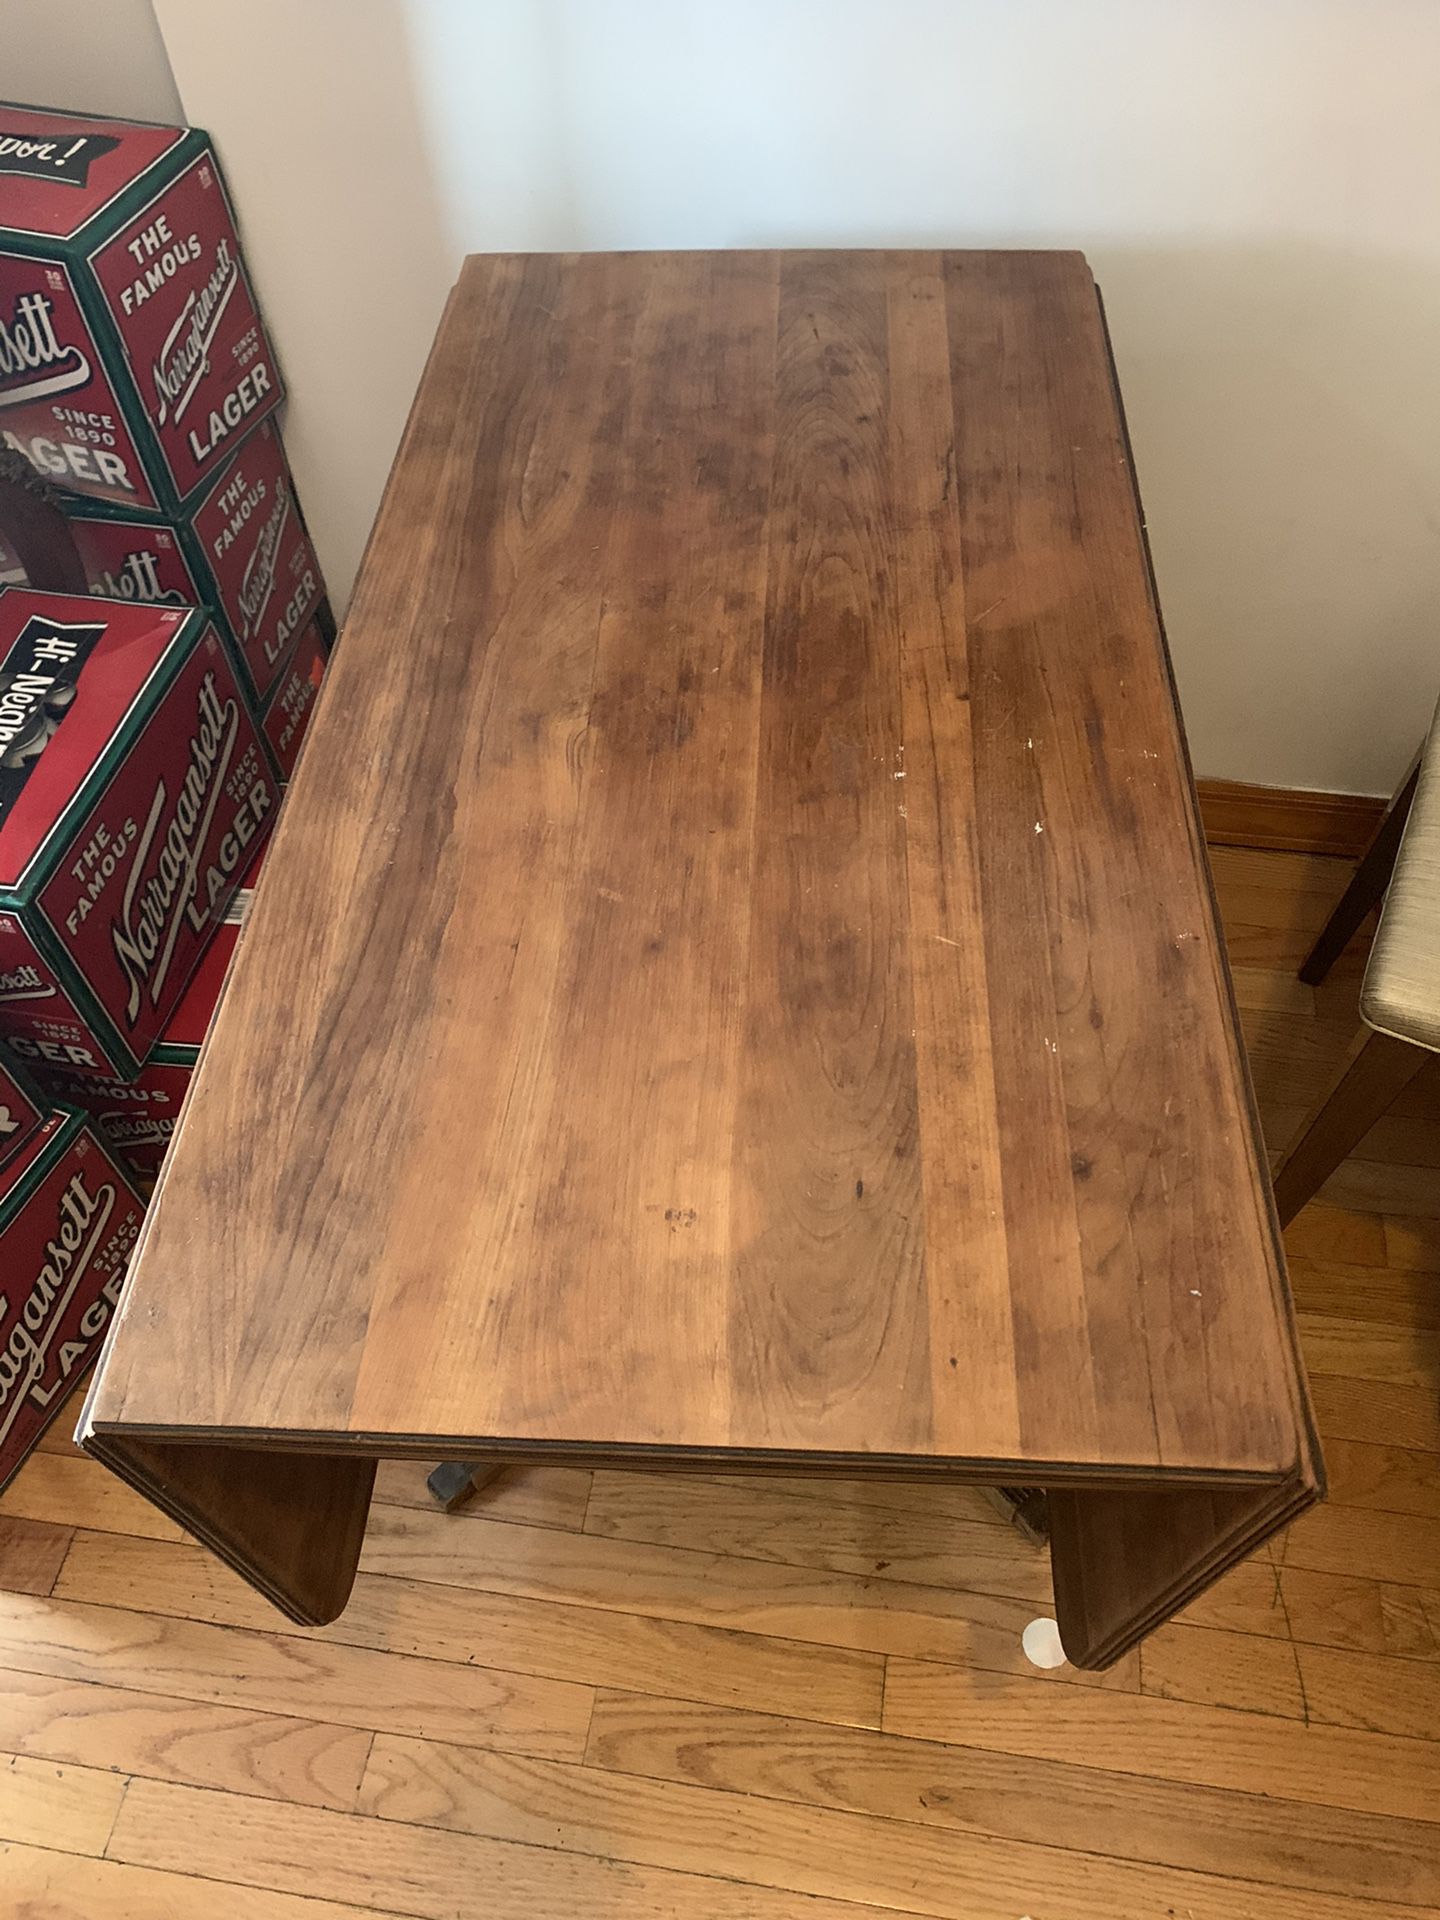 Folding table for living room or kitchen.